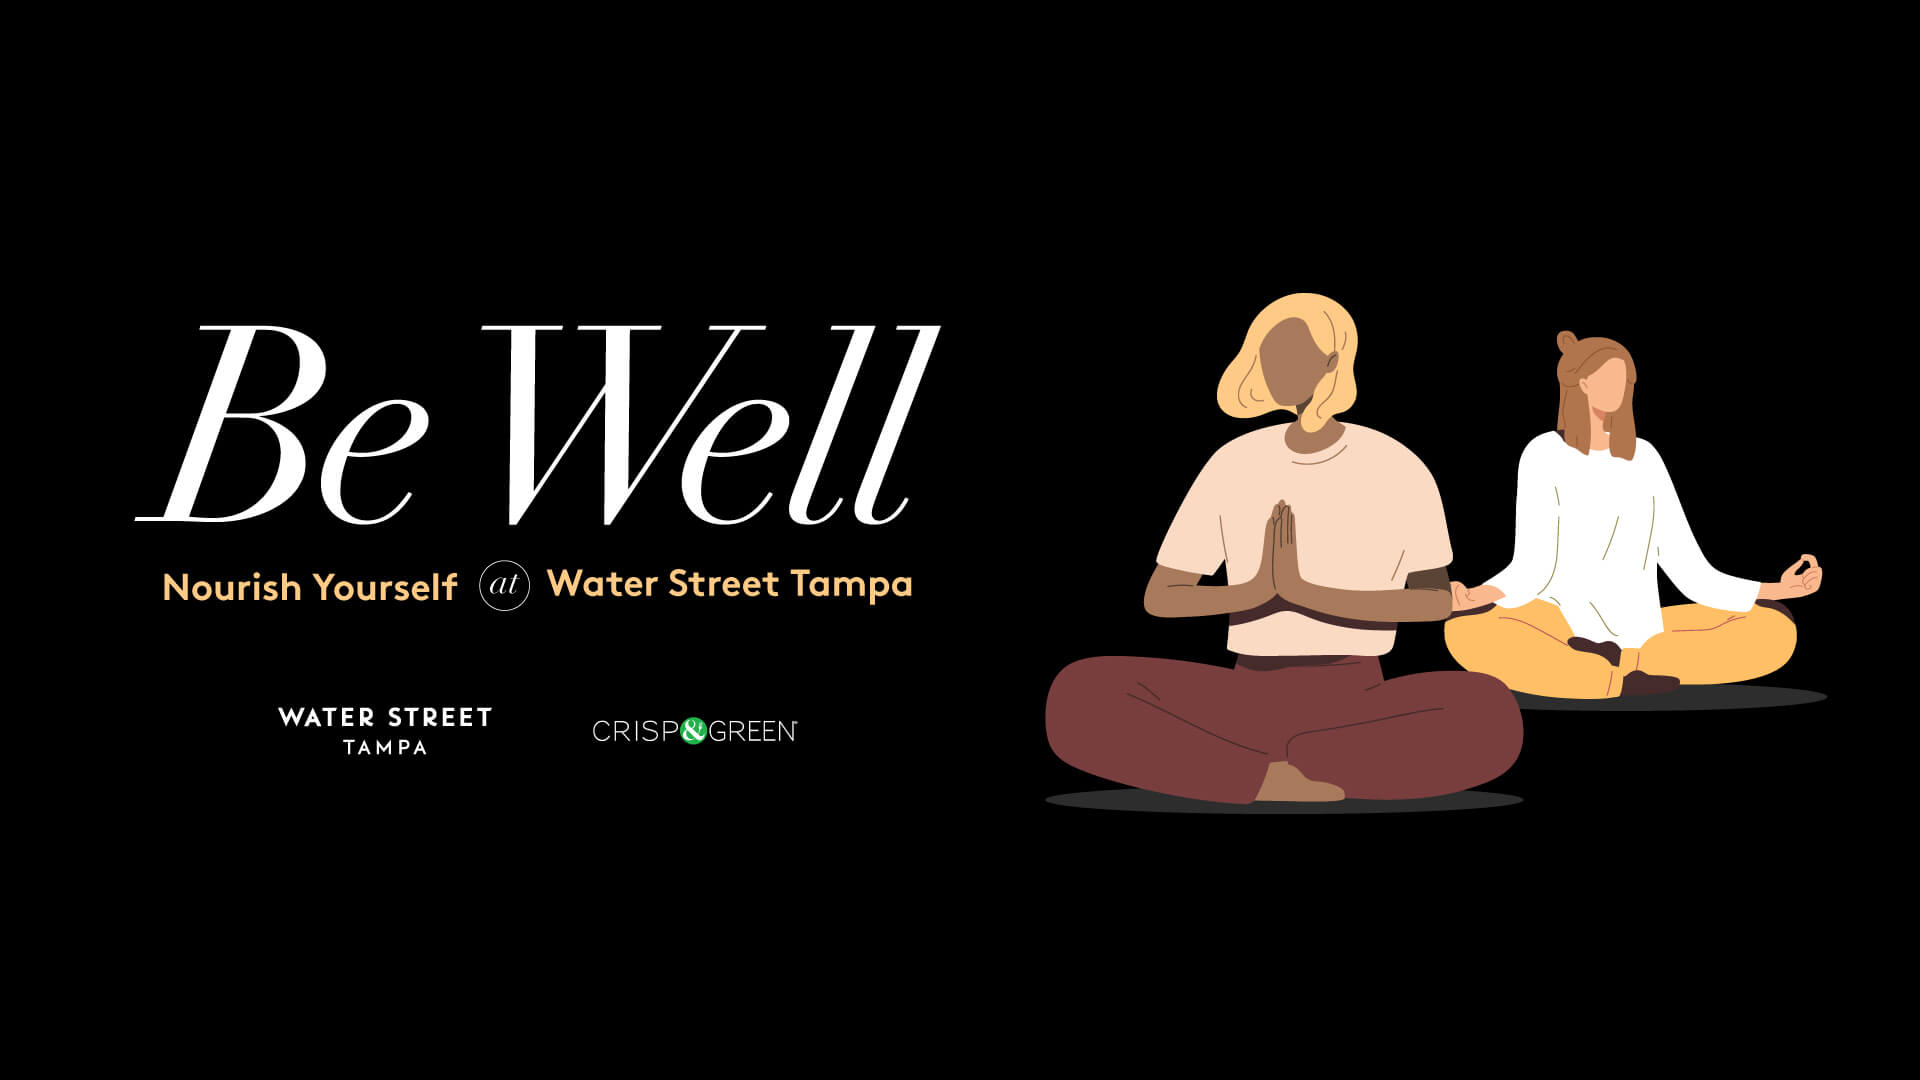 A graphic of Be Well's april 14th event in Water Street Tampa